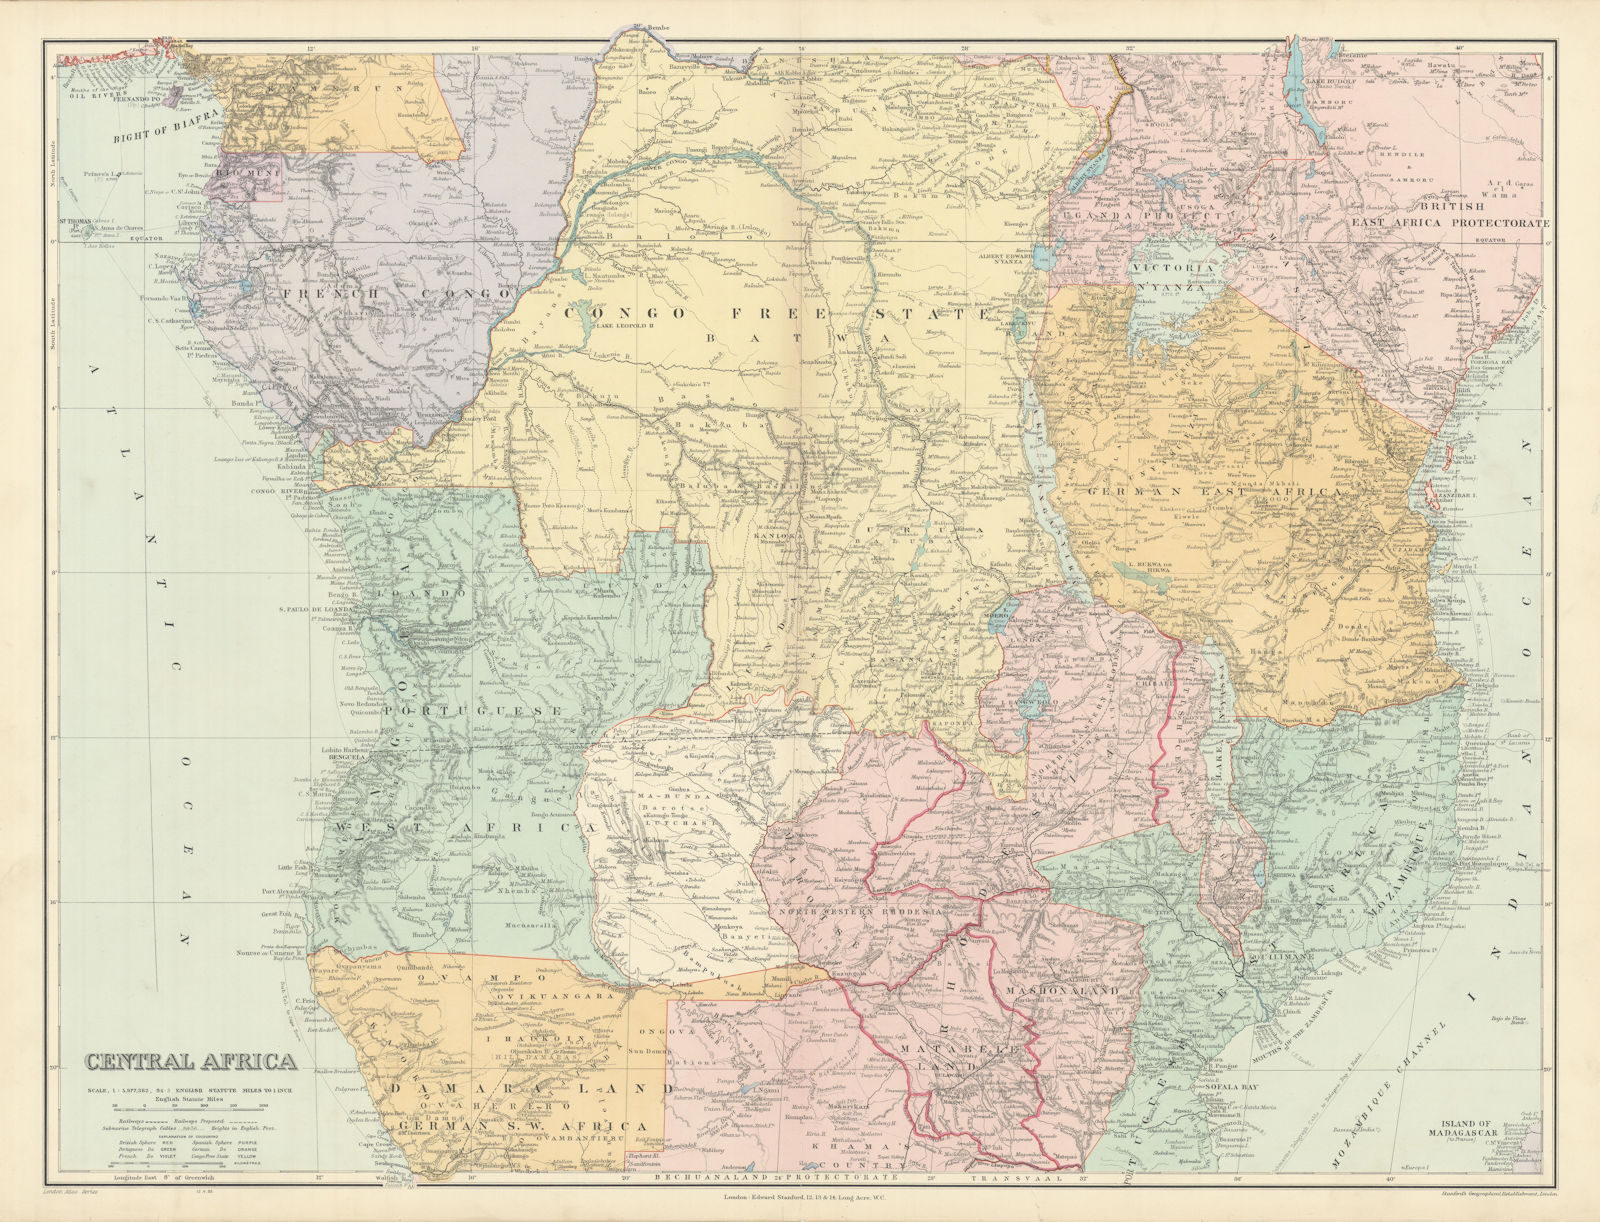 Central Africa. Congo Free State Rhodesia German East Africa. STANFORD 1904 map